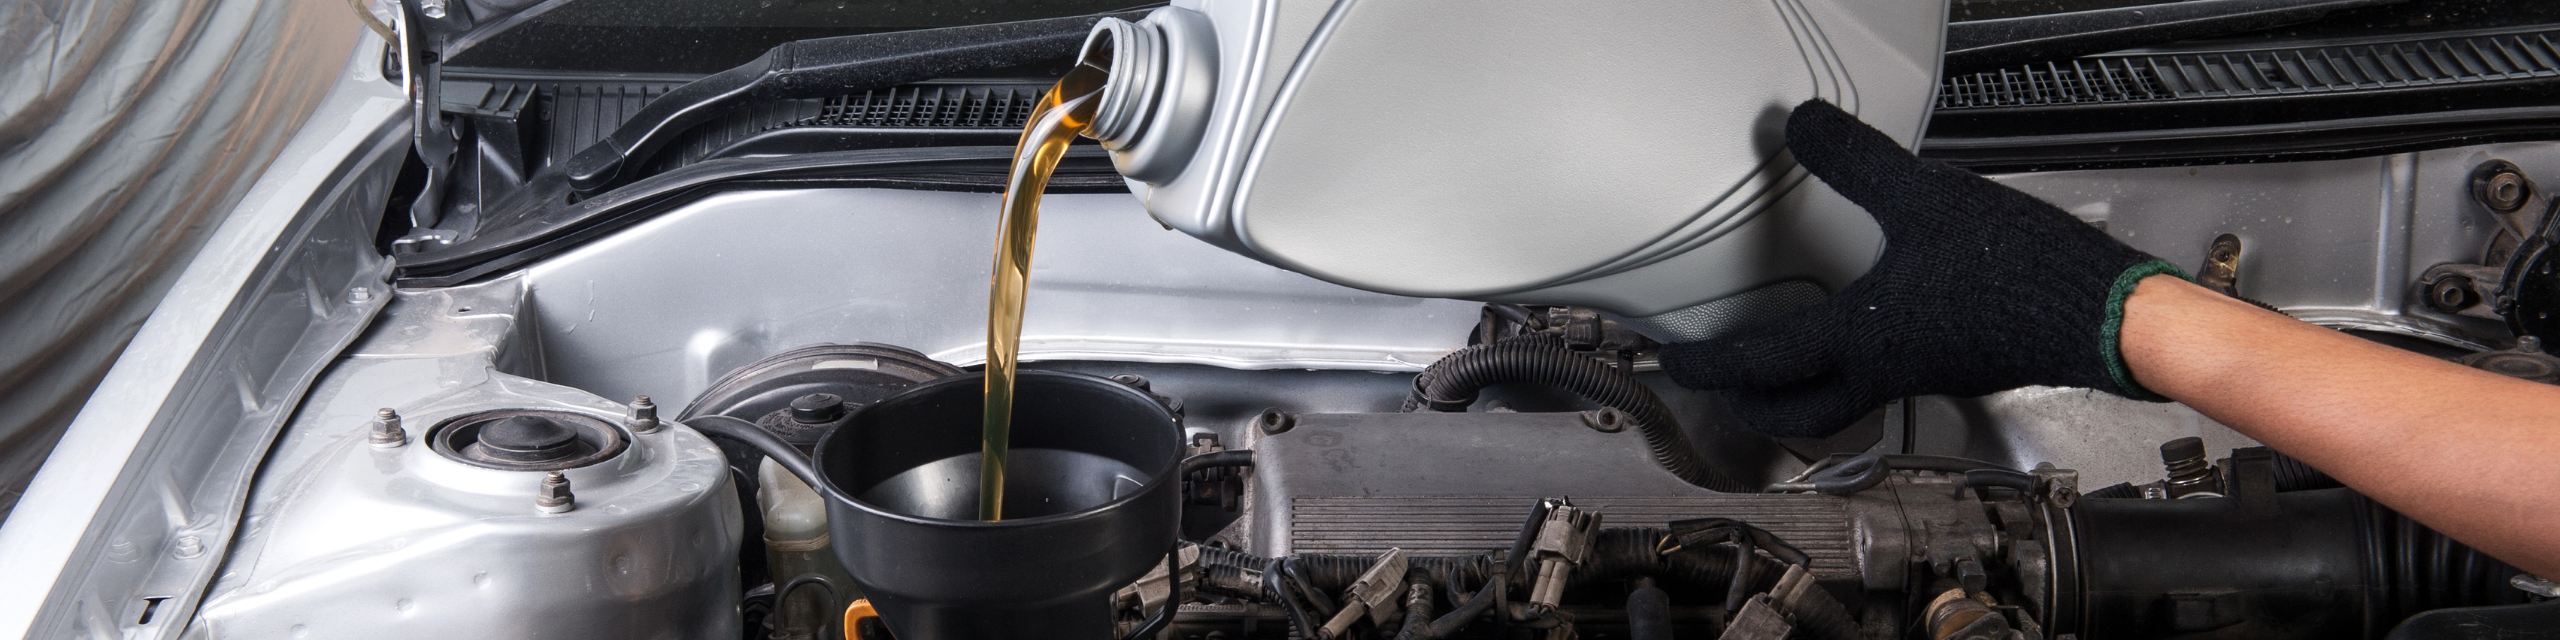 Engine oil getting poured into a vehicle